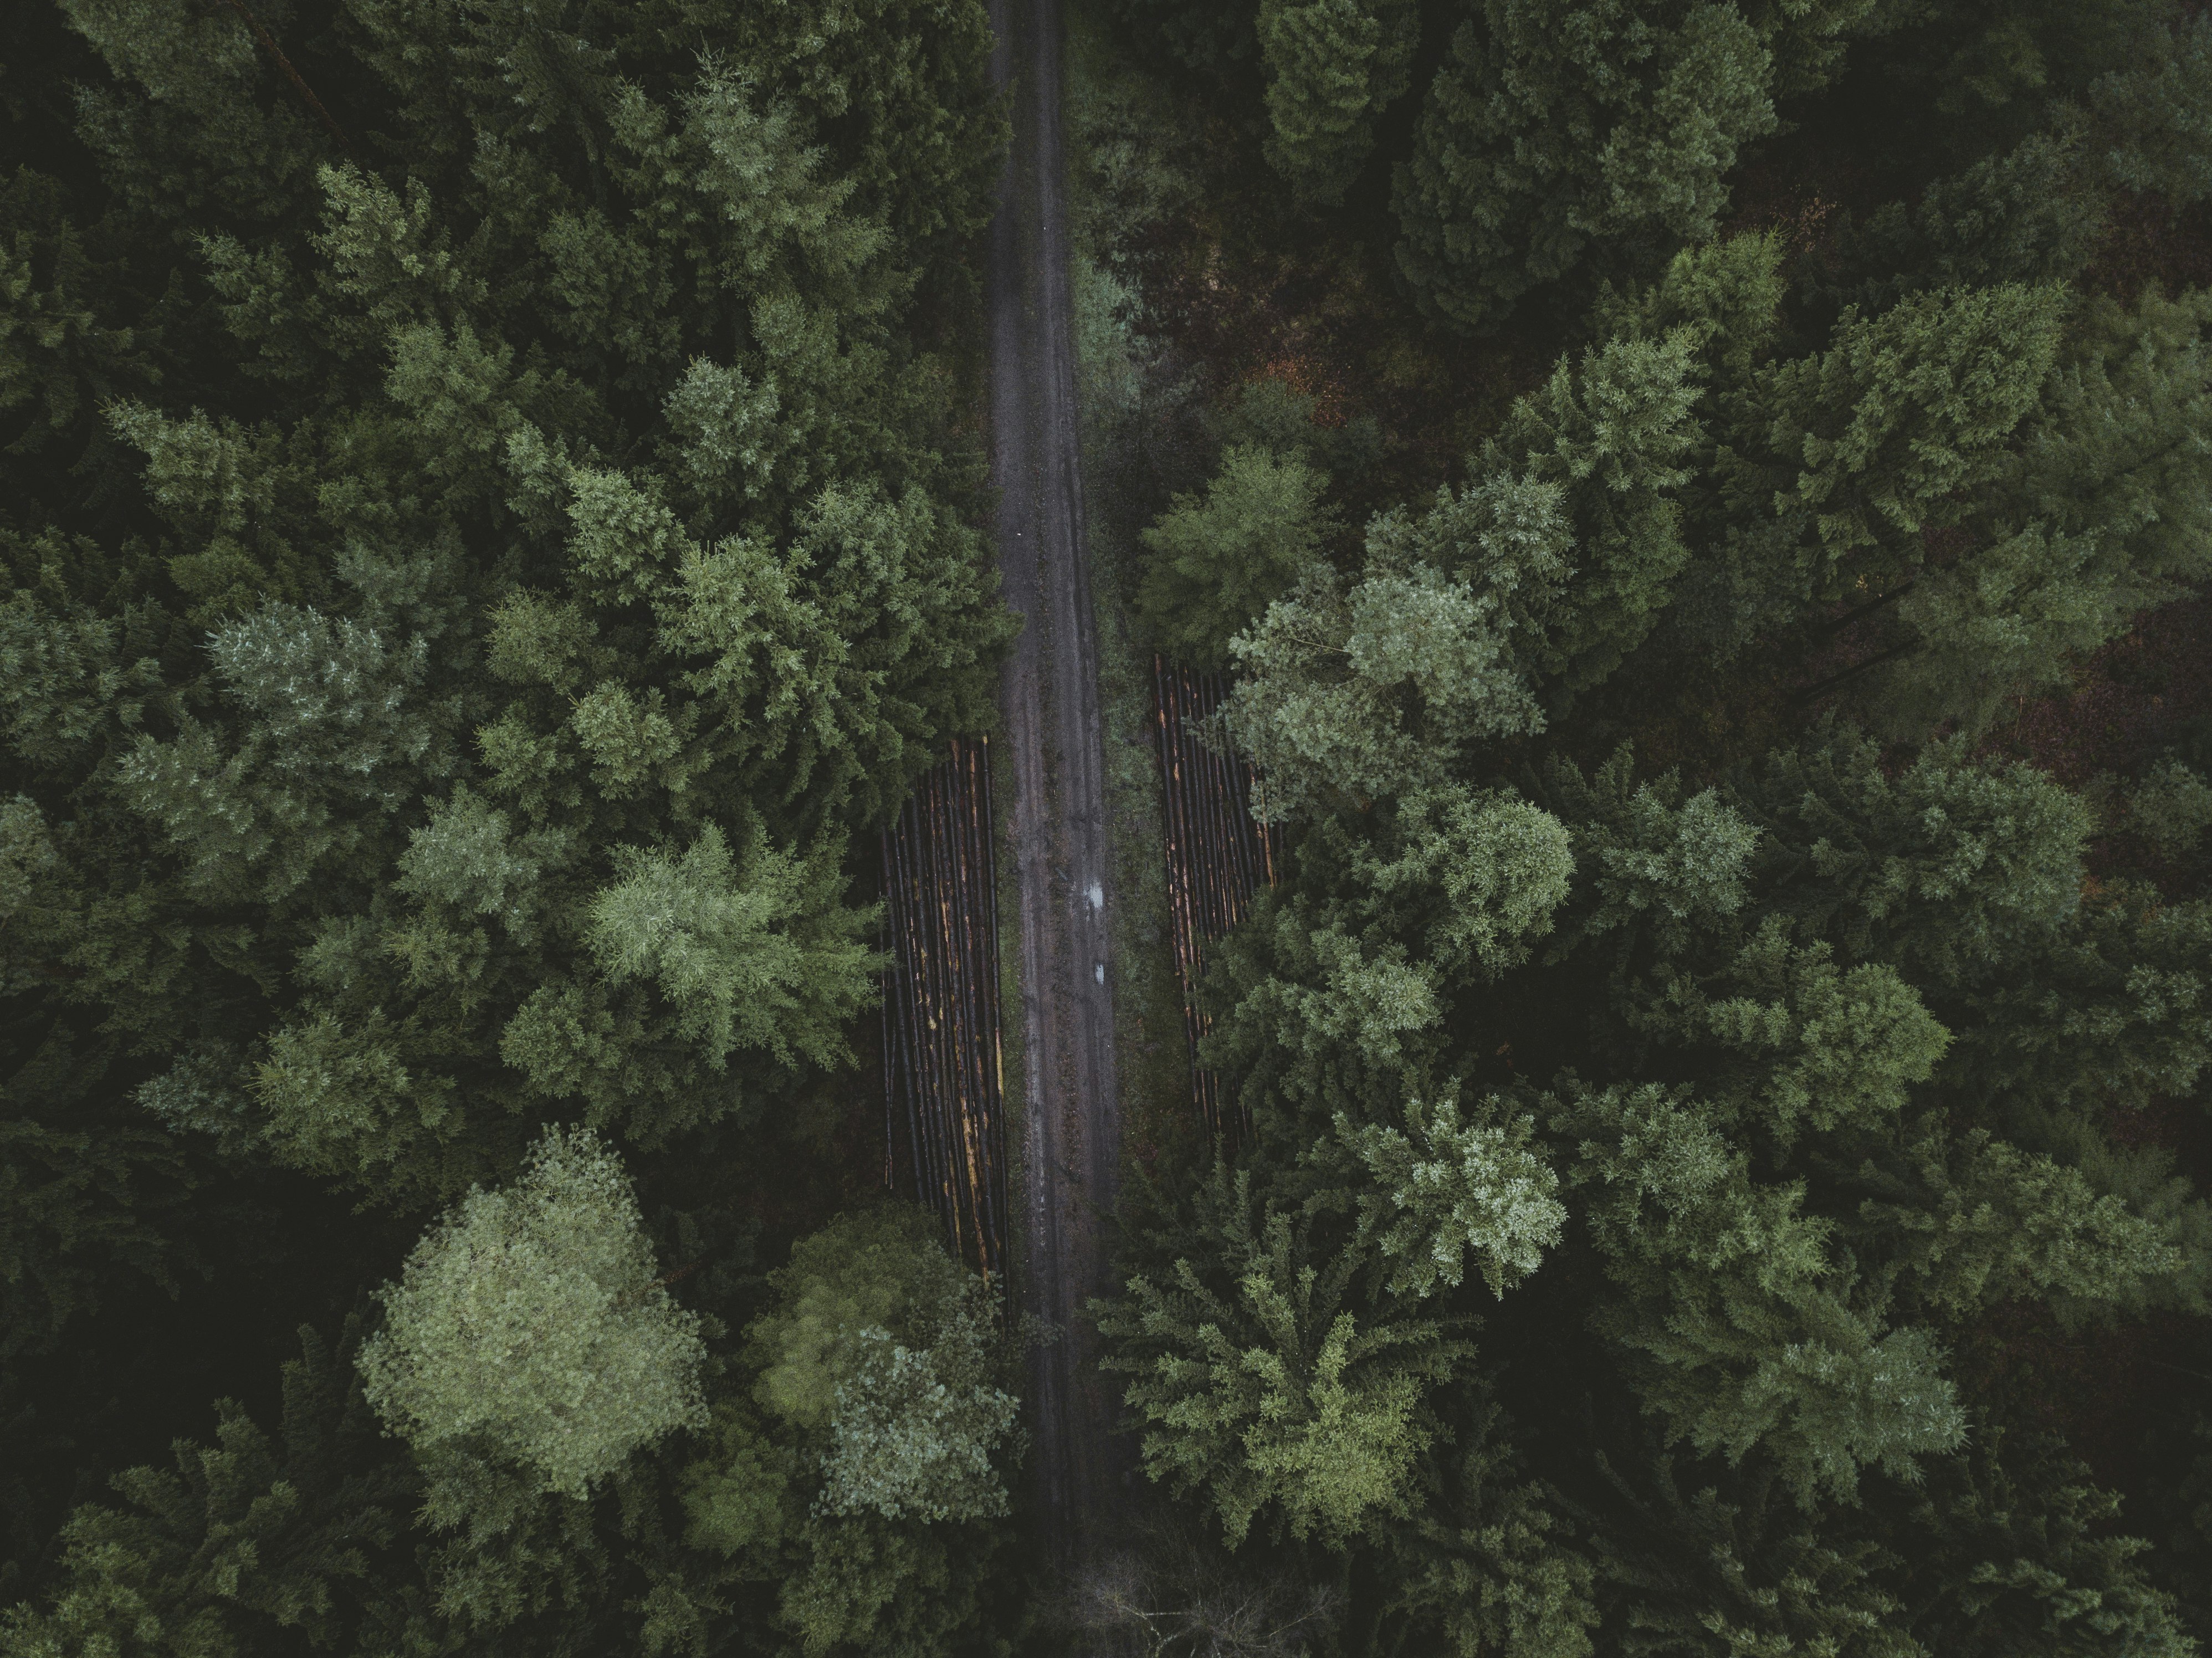 bird's-eye view photography of road surrounded with pine trees